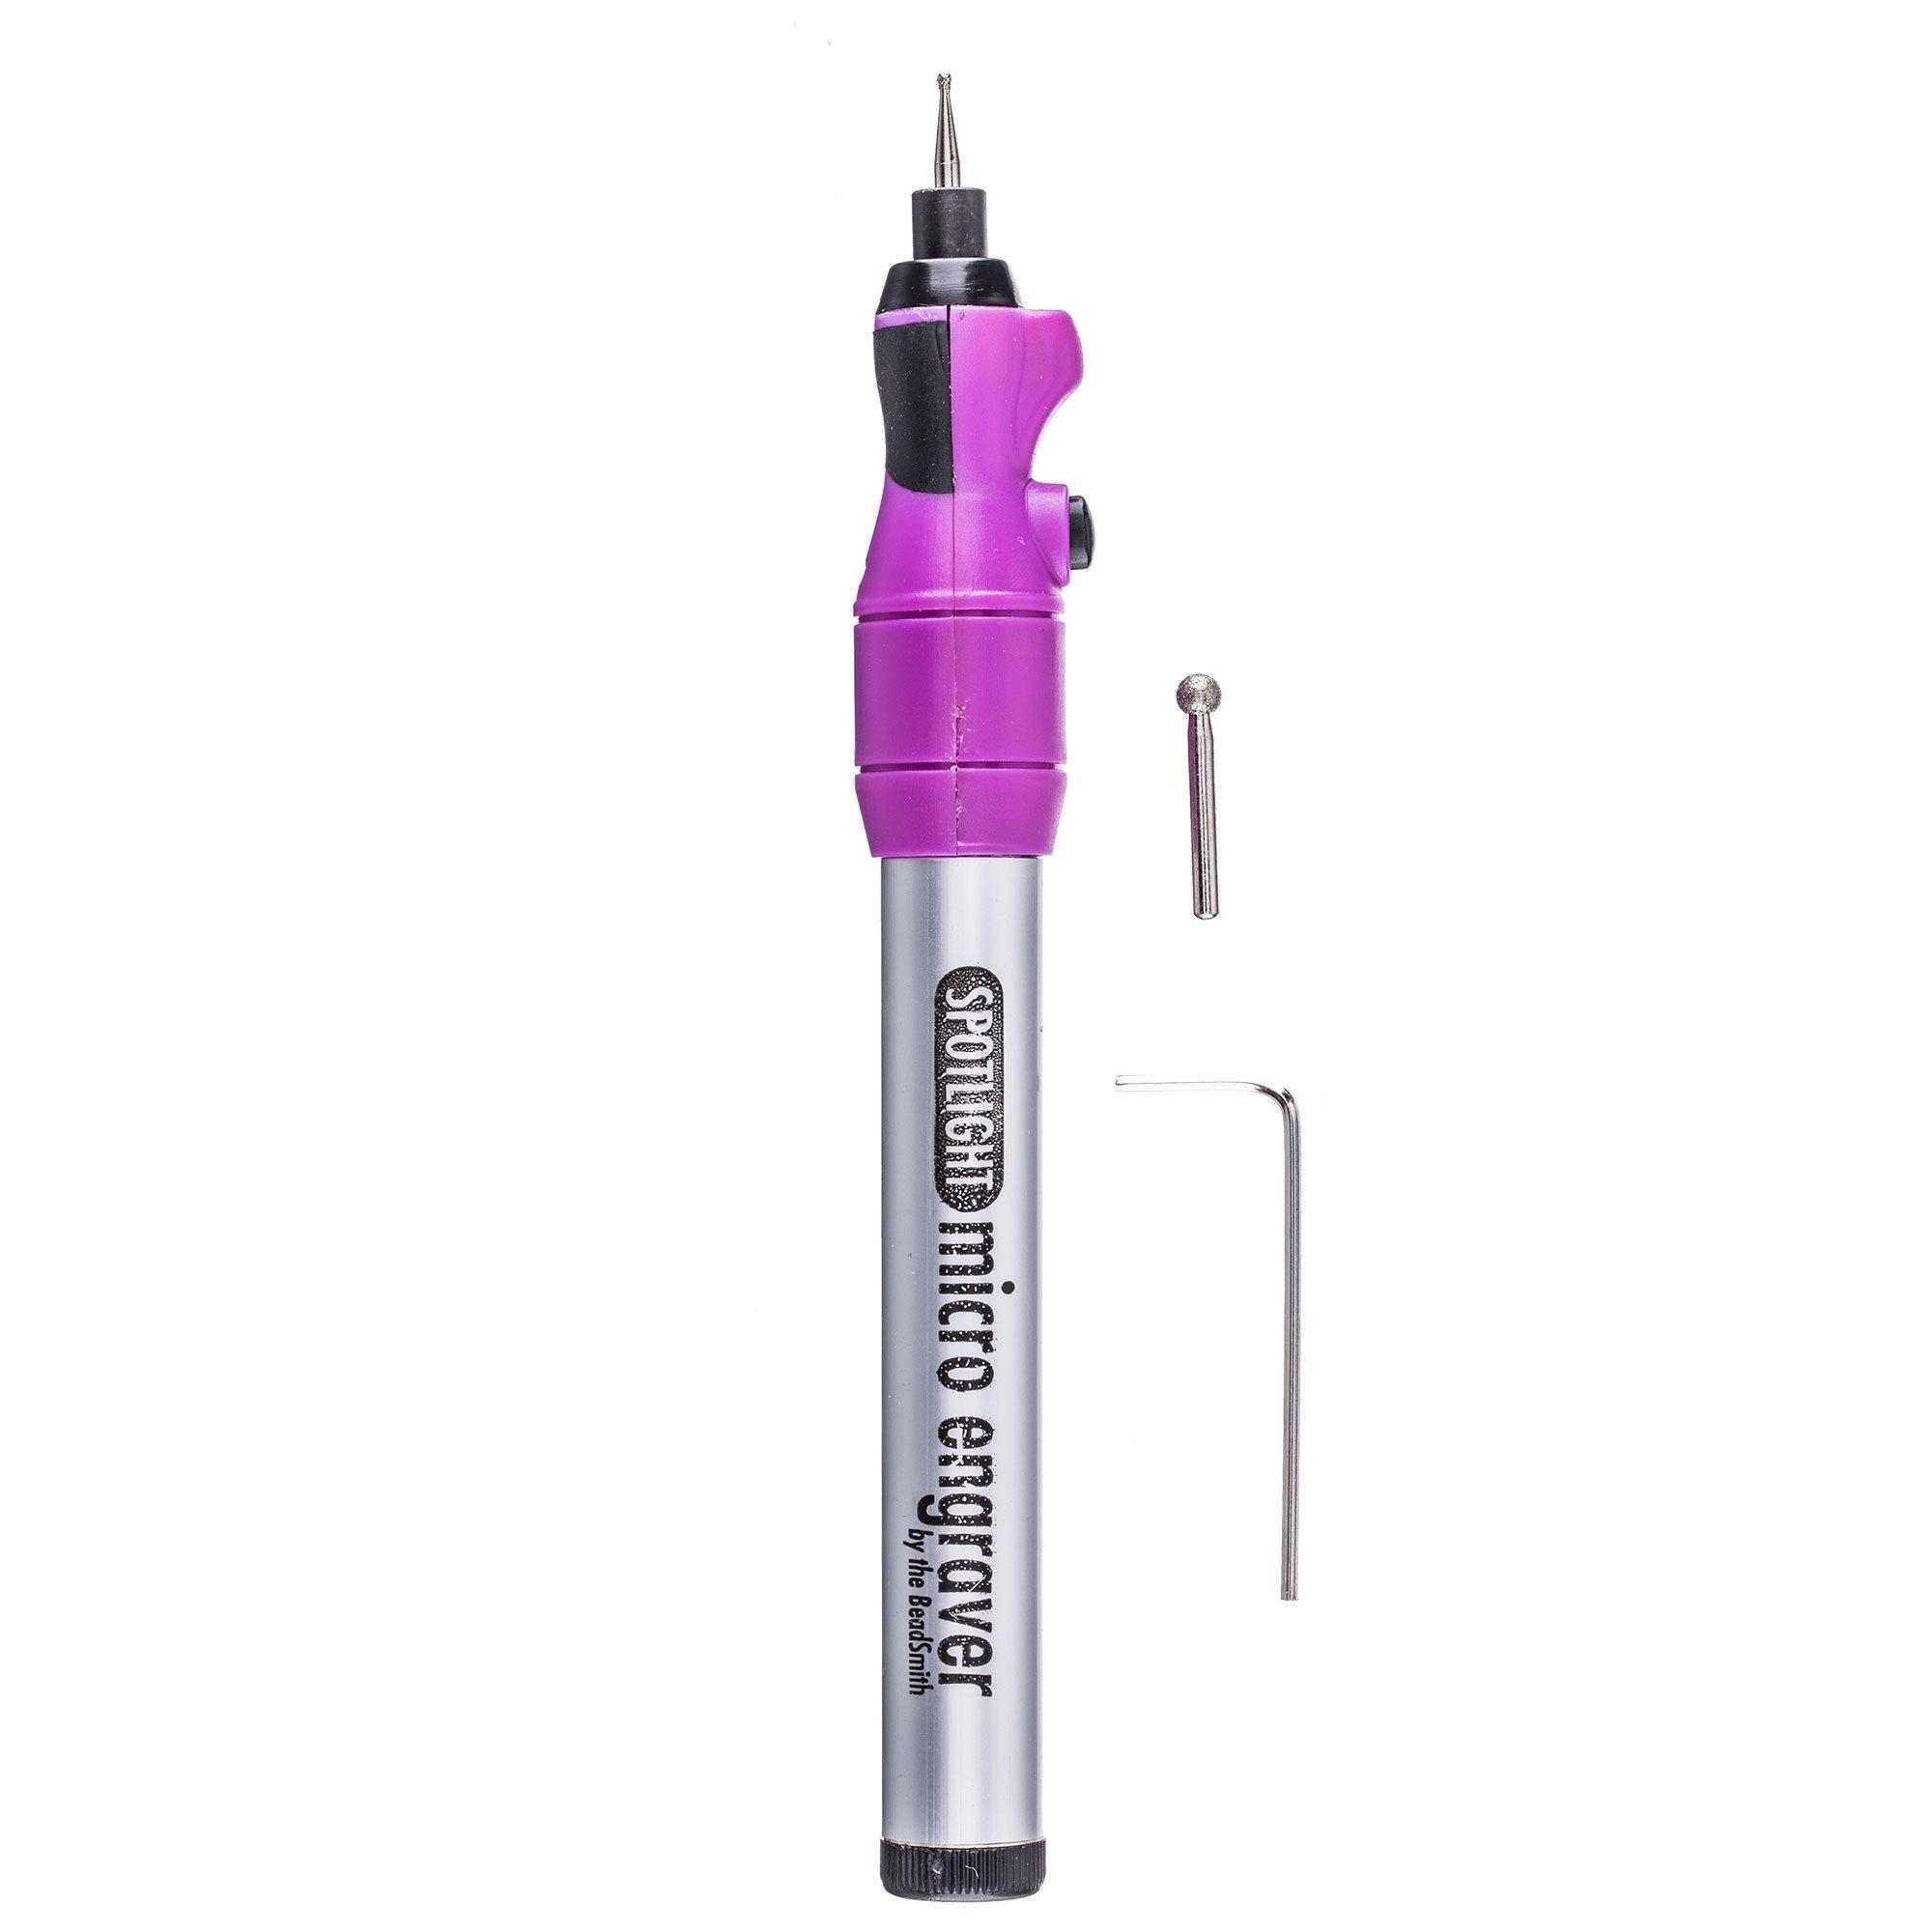 Micro Profiler Engraving Tools: For Fine, Small Engraving - 2L Inc.